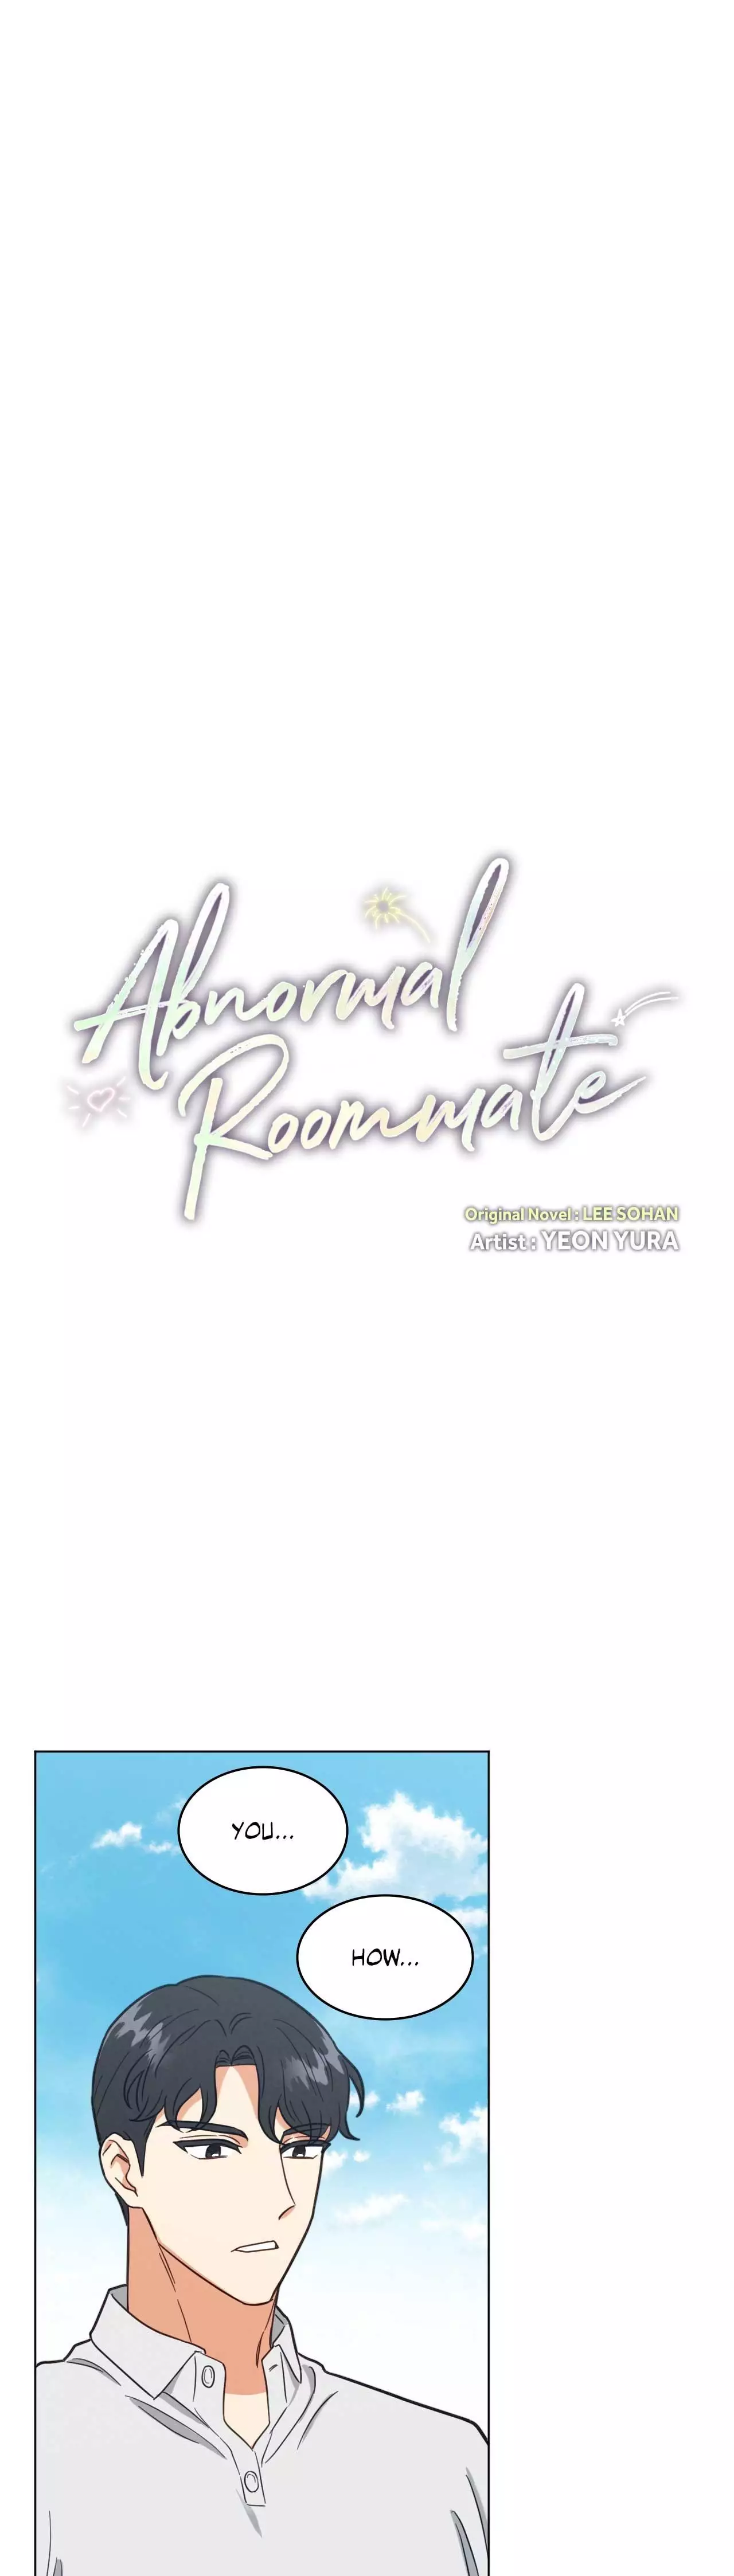 Abnormal Rommate - 47 page 2-e4324aa7